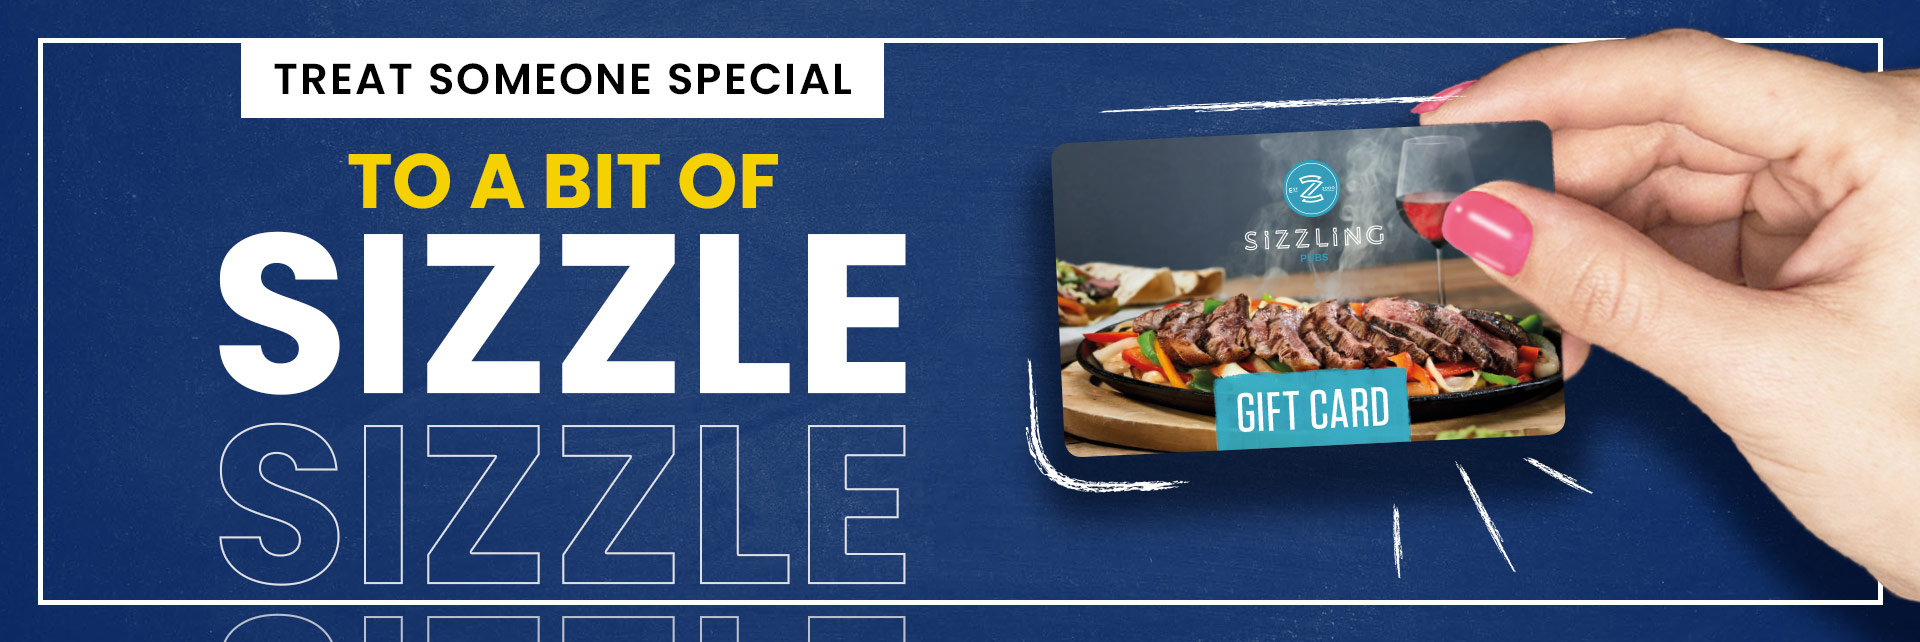 Sizzling Pubs Gift Card at The Crown and Anchor in West Bromwich